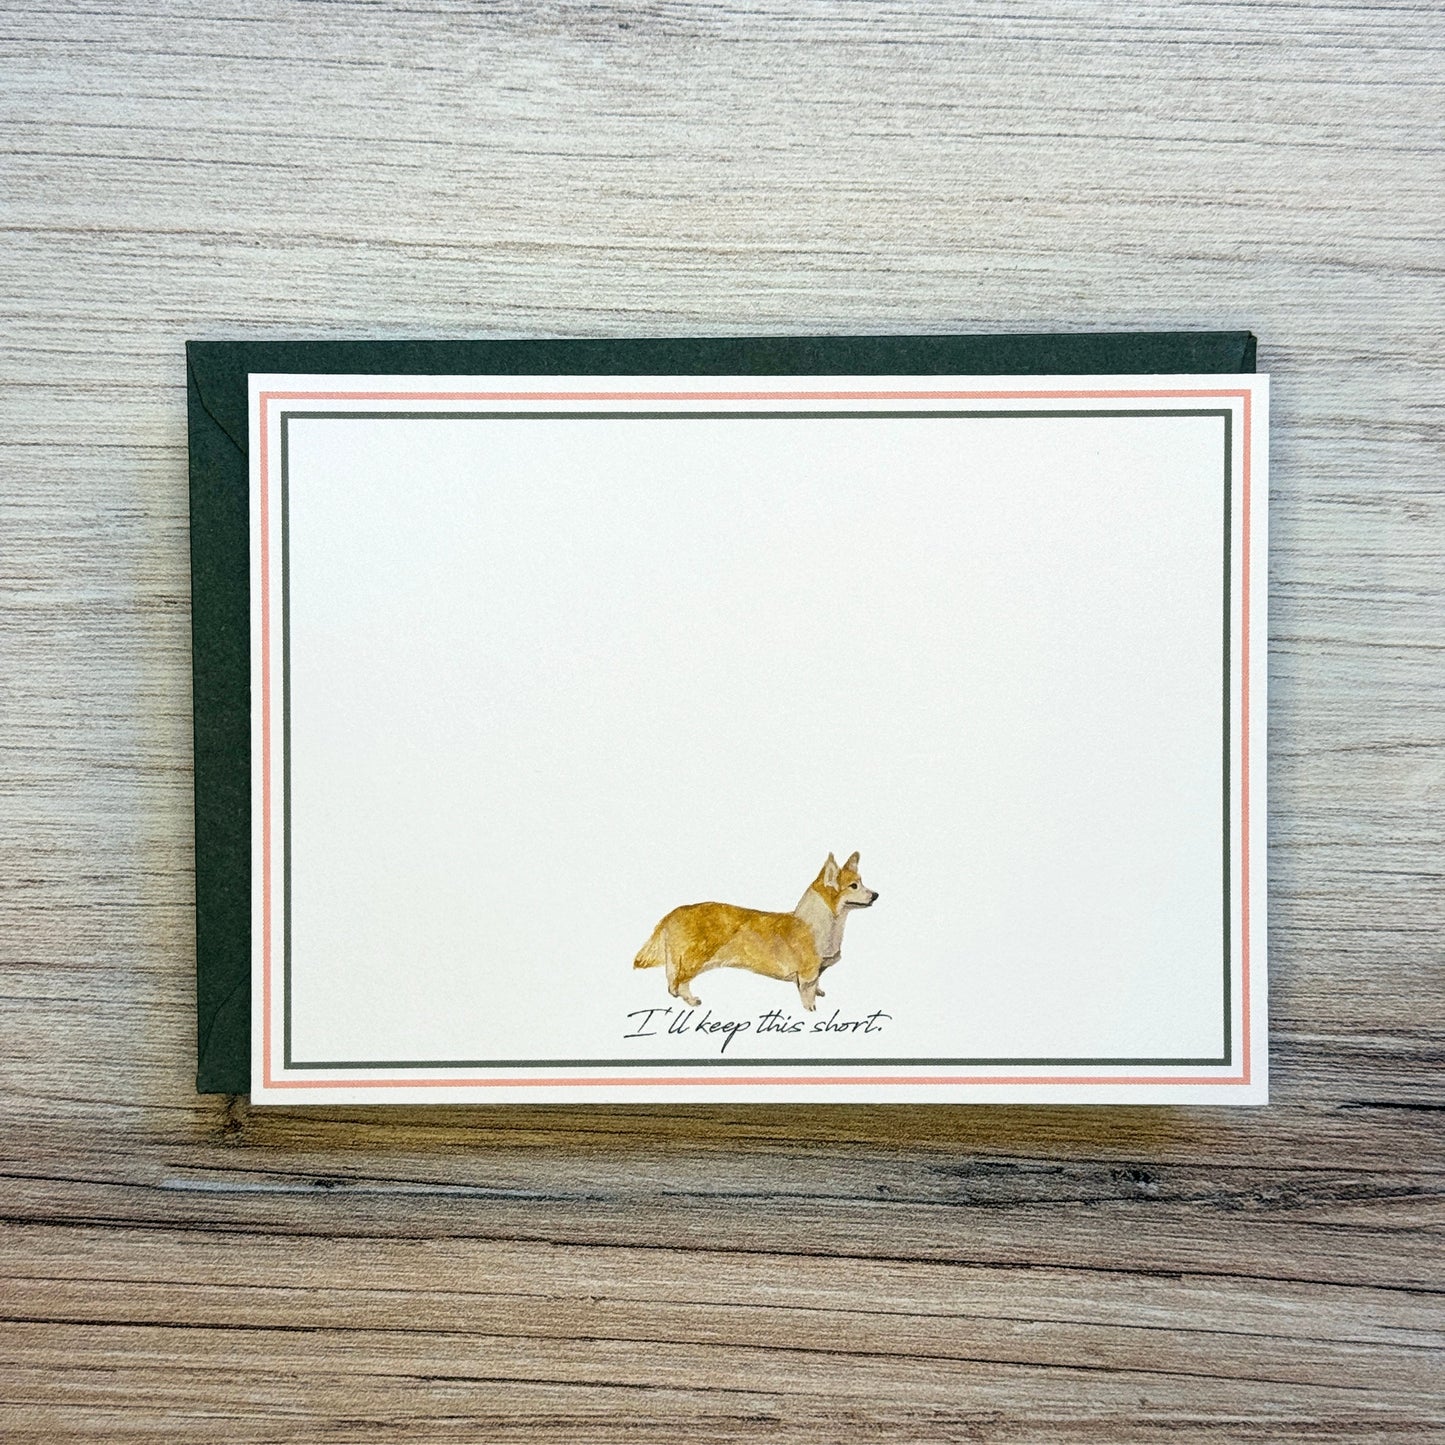 Canine Compadres "I'll keep this short" Notecard Set (10)